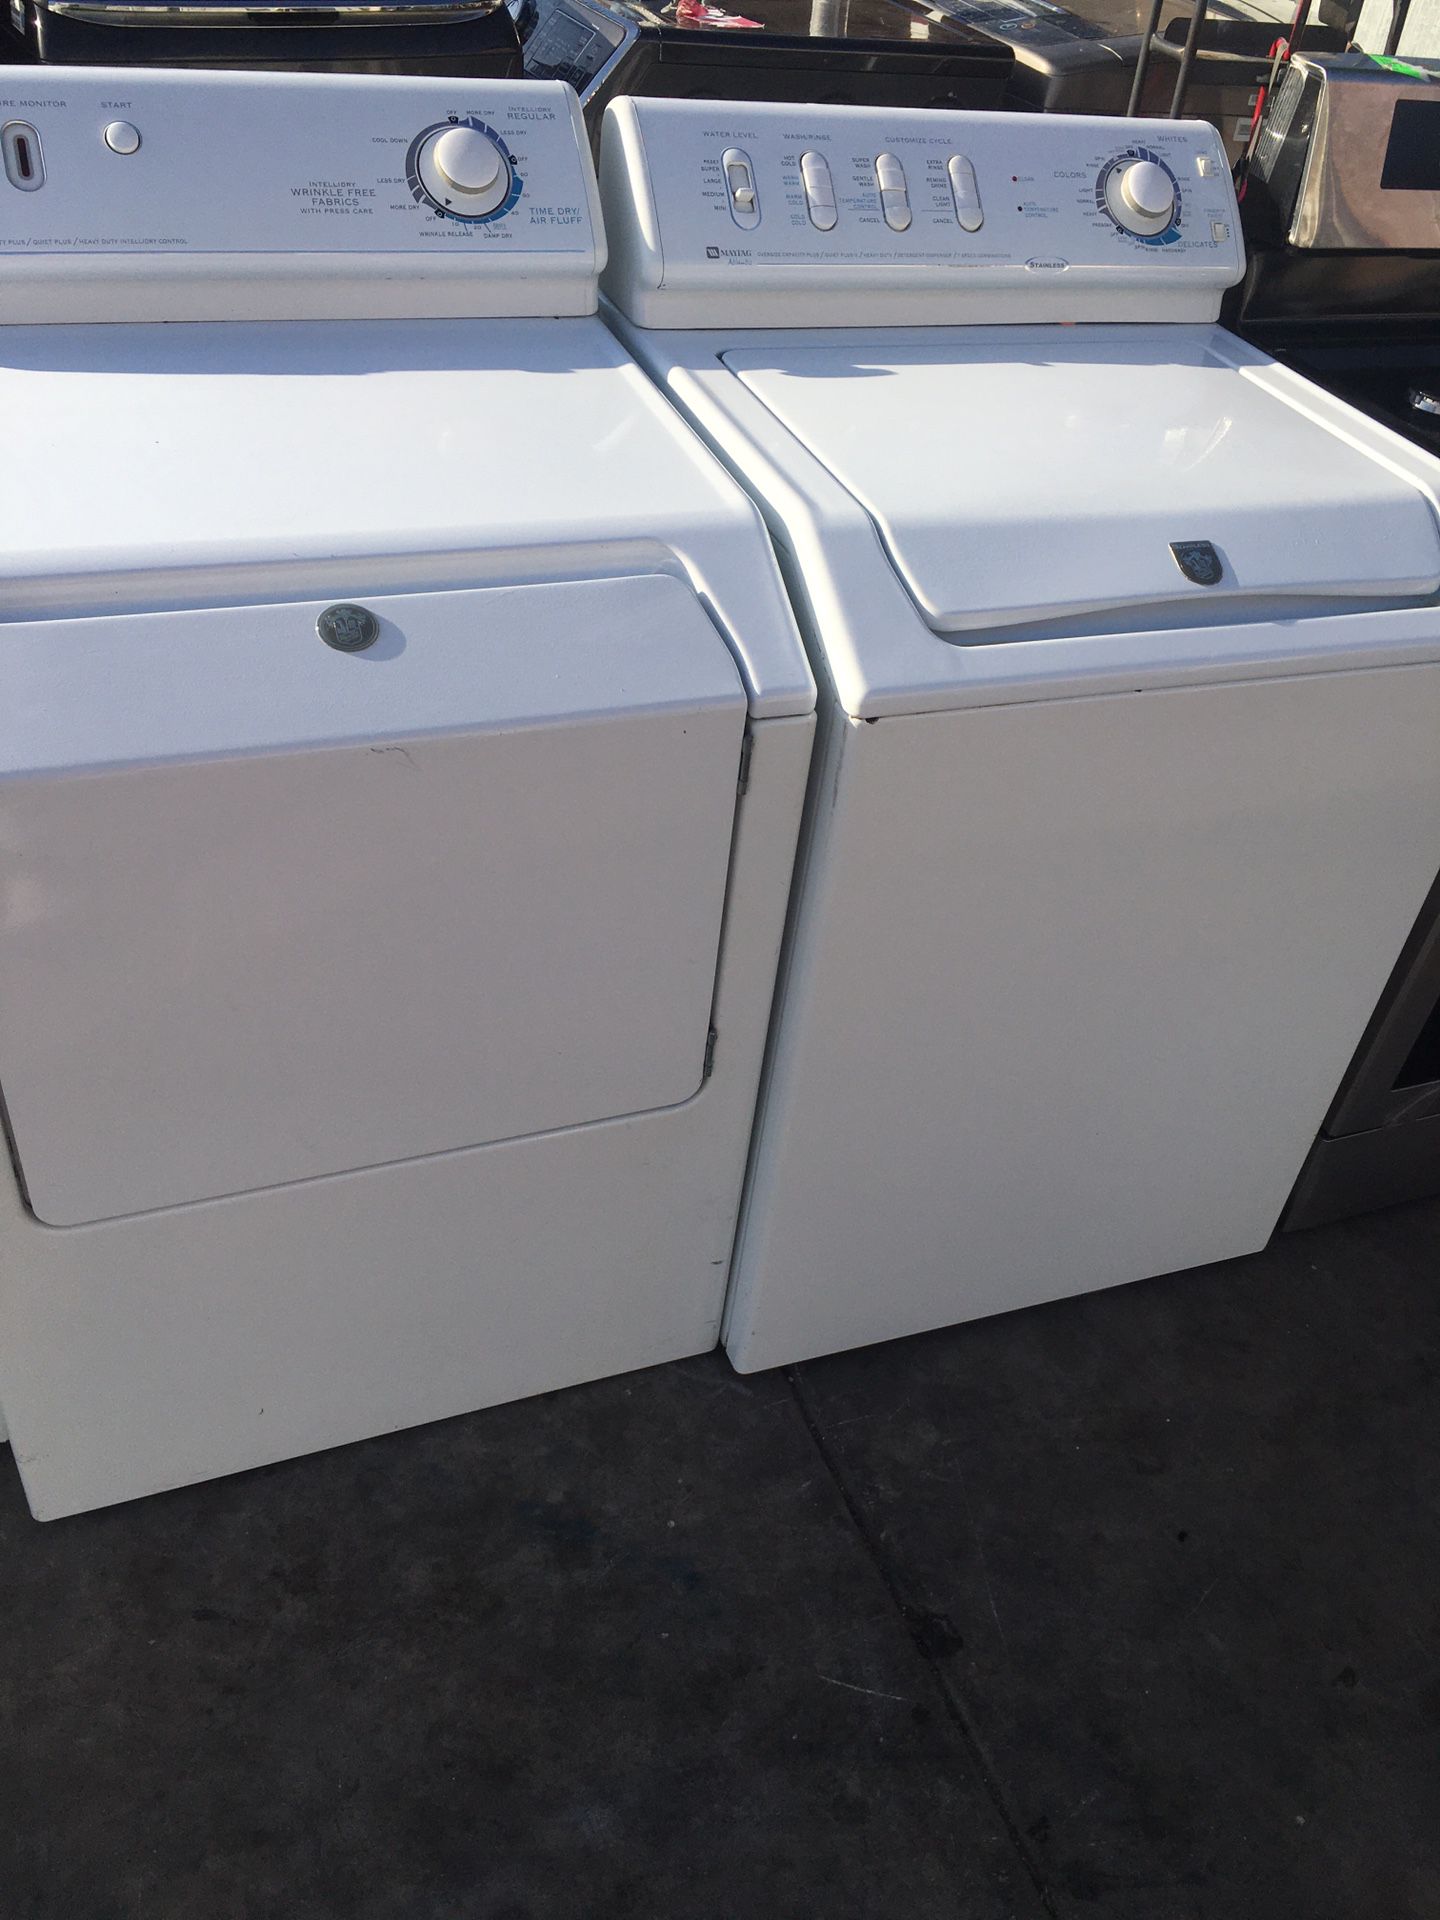 MAYTAG WASHER AND GAS DRYER TOP LOAD